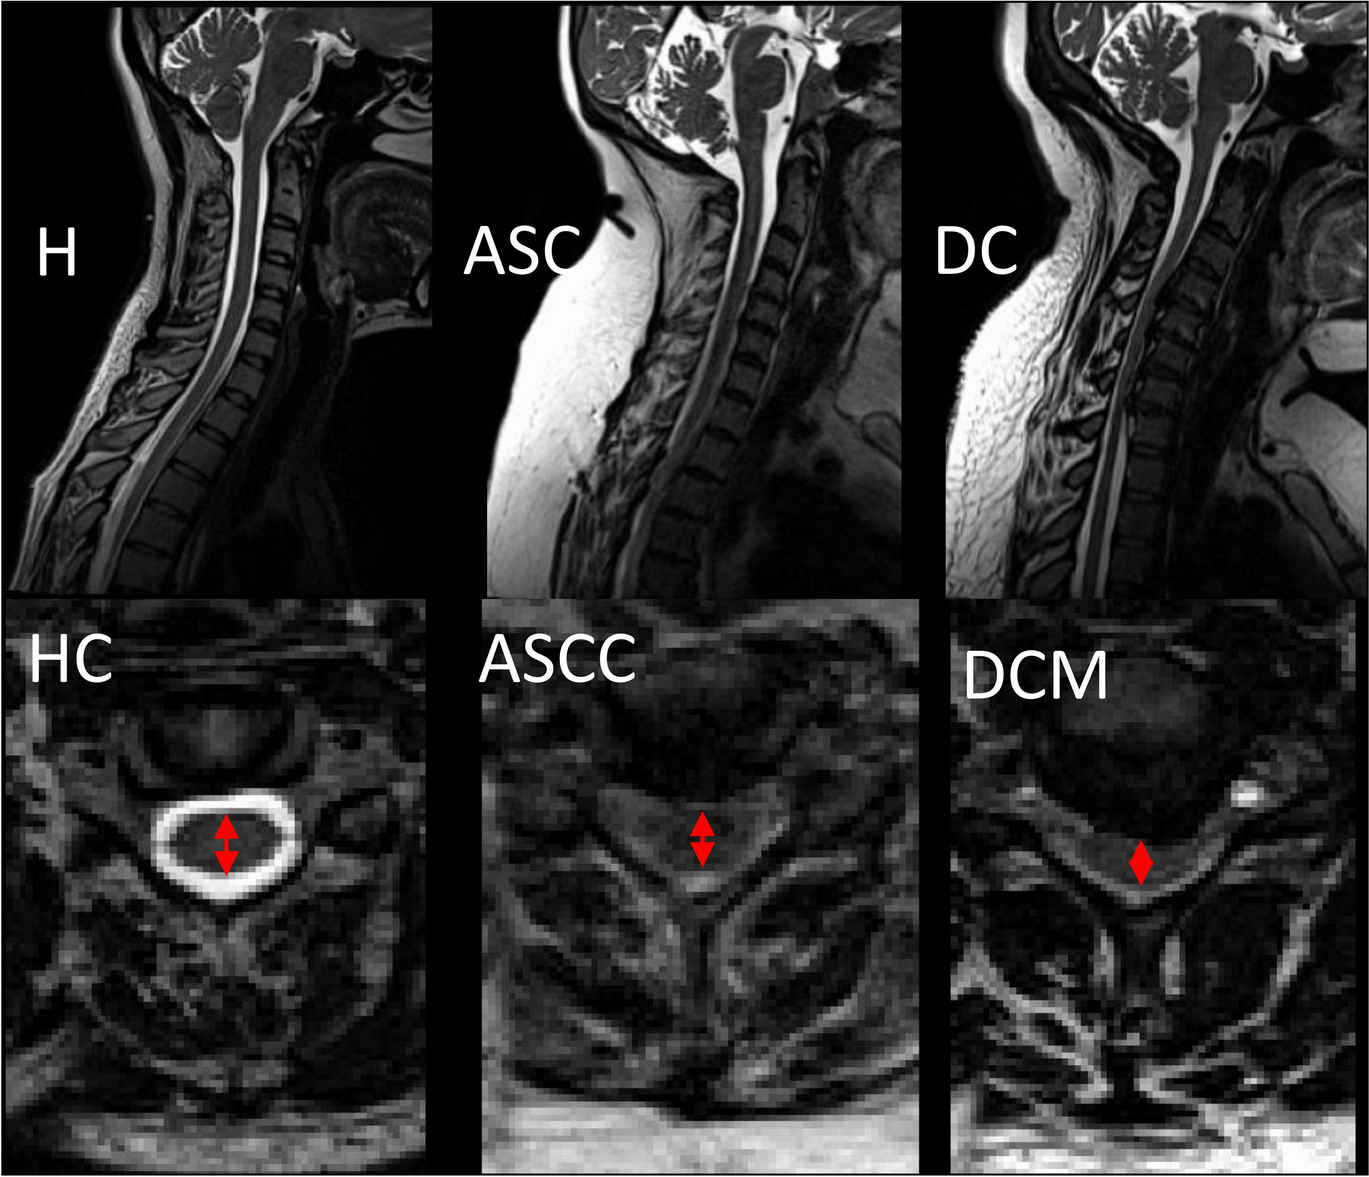 Early neurological changes in aging cervical spine: insights from PROMIS mobility assessment